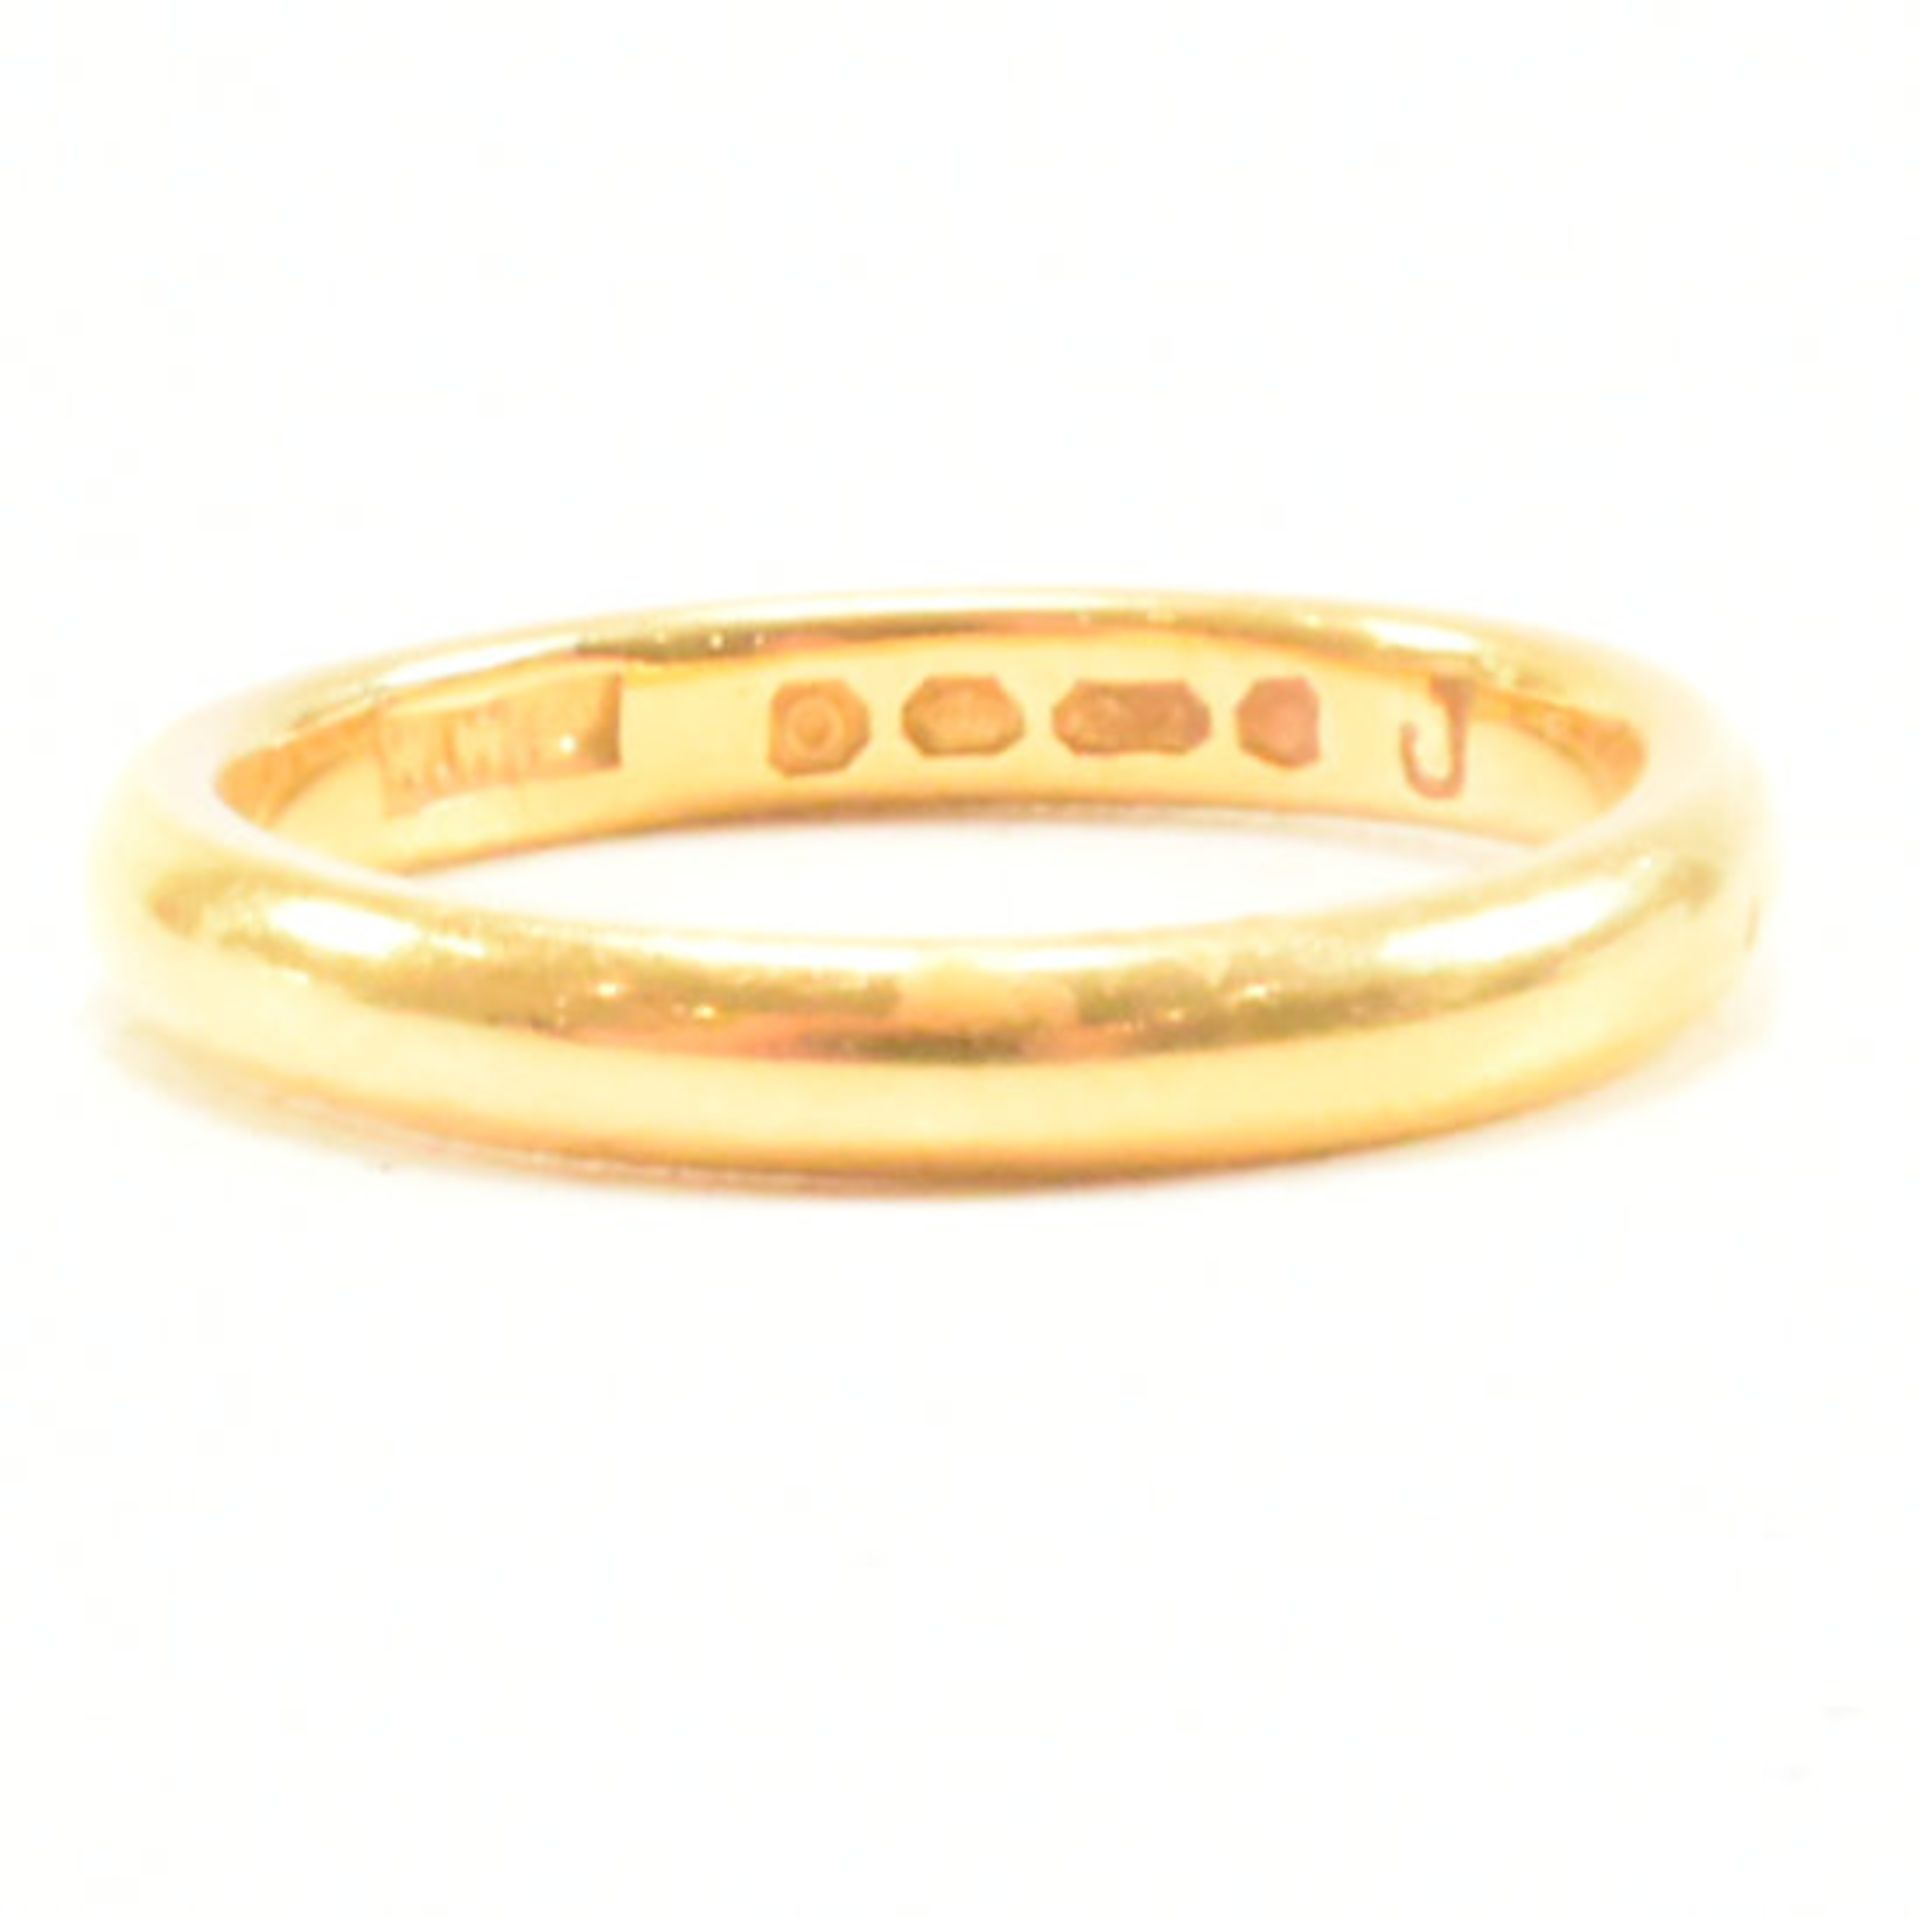 HALLMARKED 22CT GOLD BAND RING - Image 4 of 8